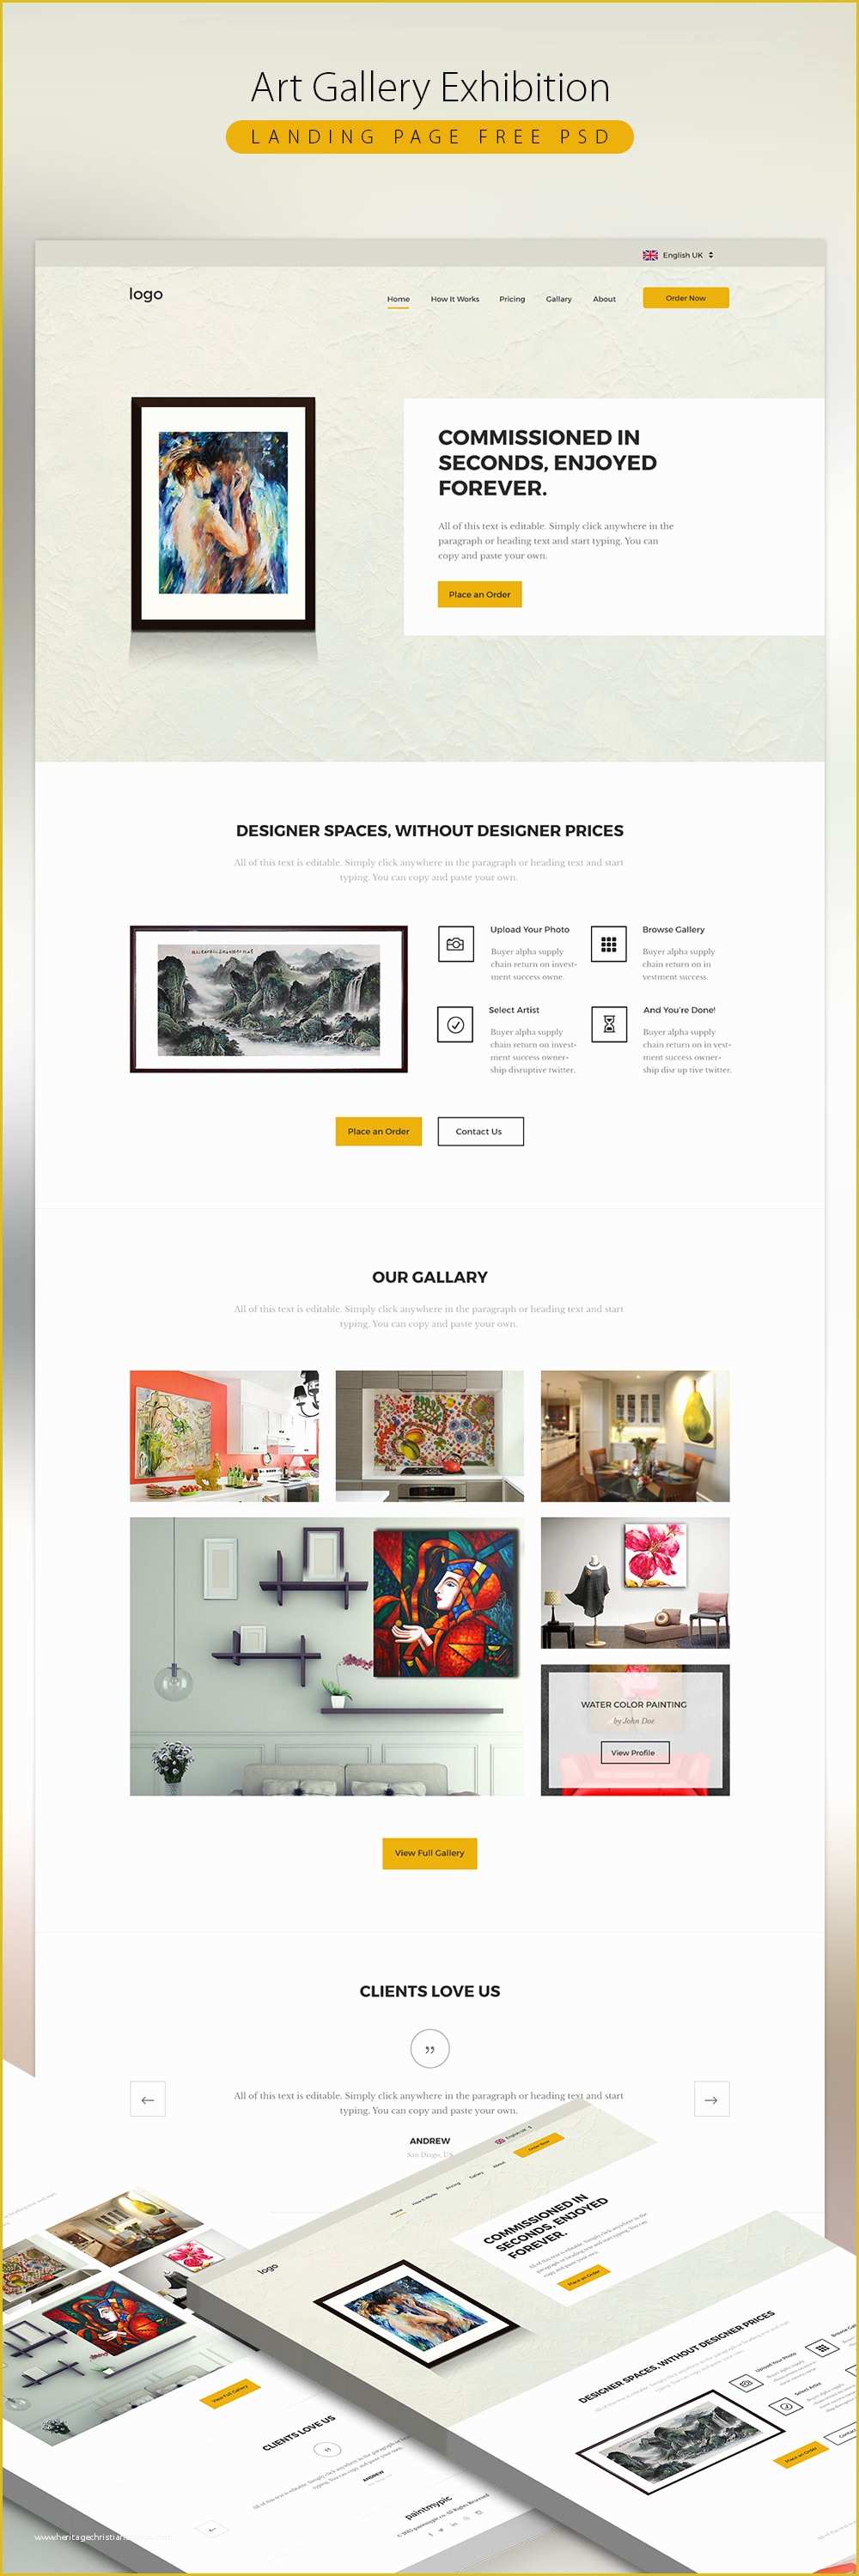 Art Gallery Websites Templates Free Of Art Gallery Exhibition Landing Page Free Psd Download Psd